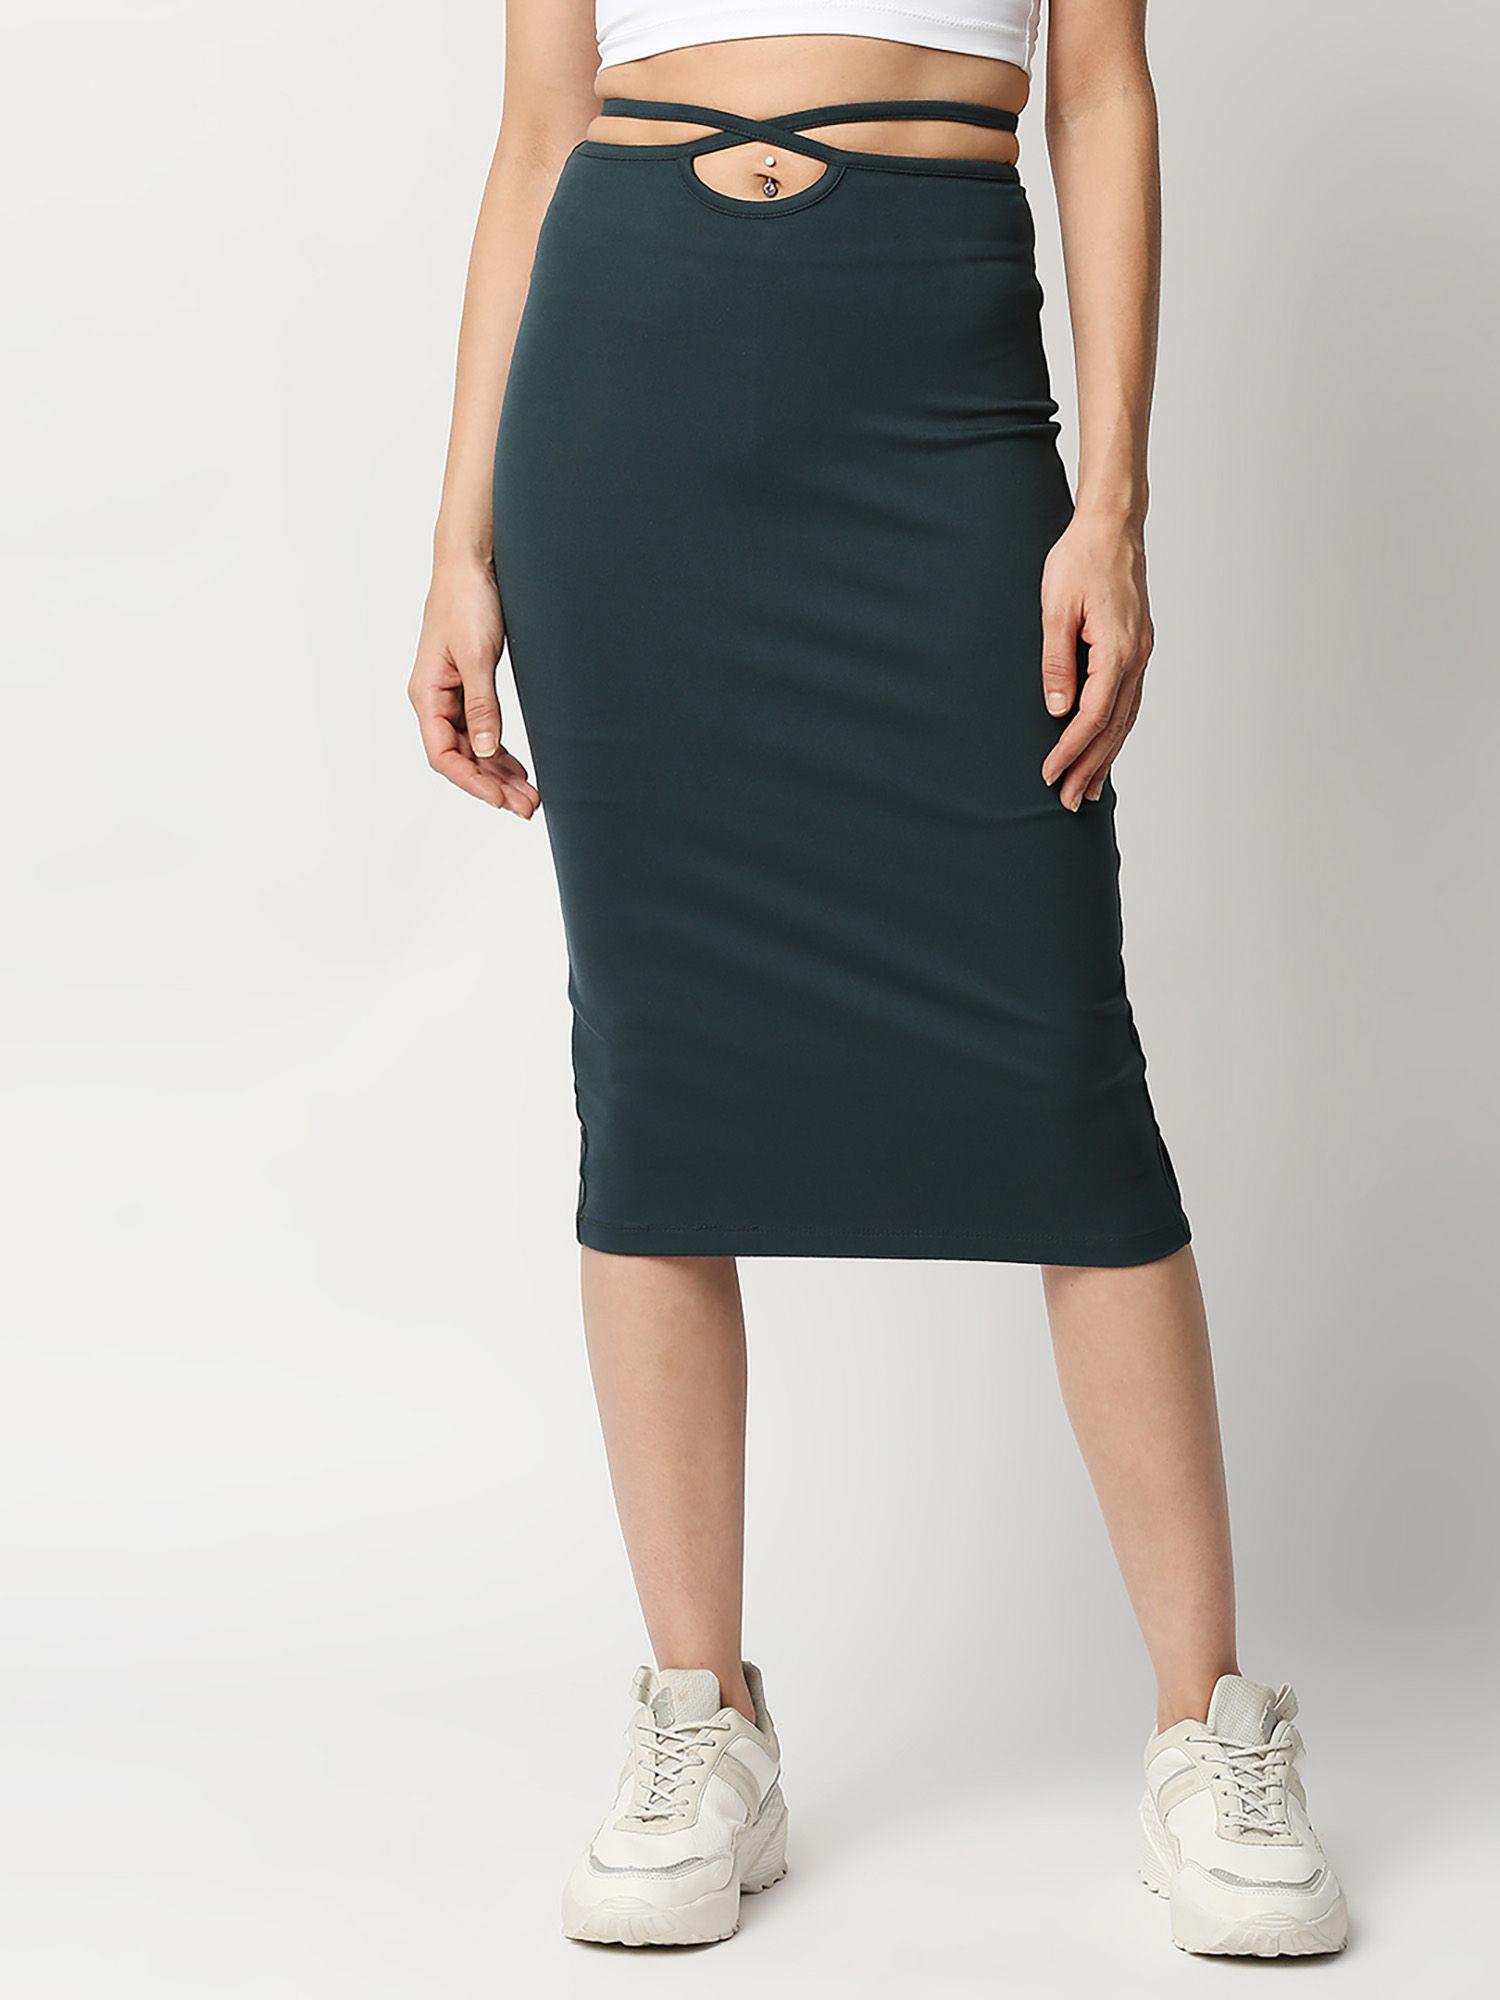 women-green-tie-up-slim-fit-stretchable-pencil-skirt